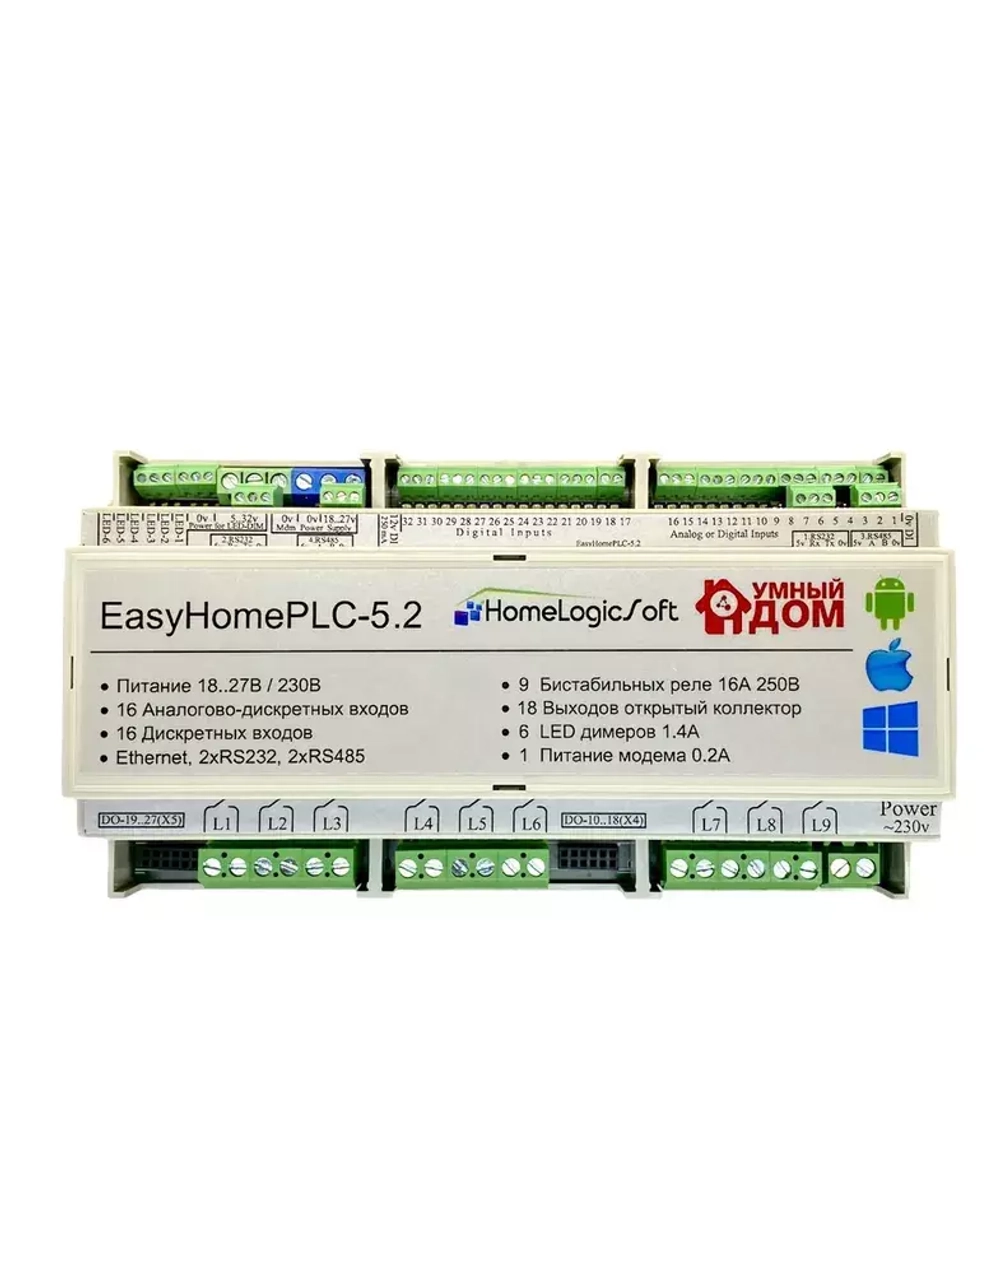 EasyHomePLC-5